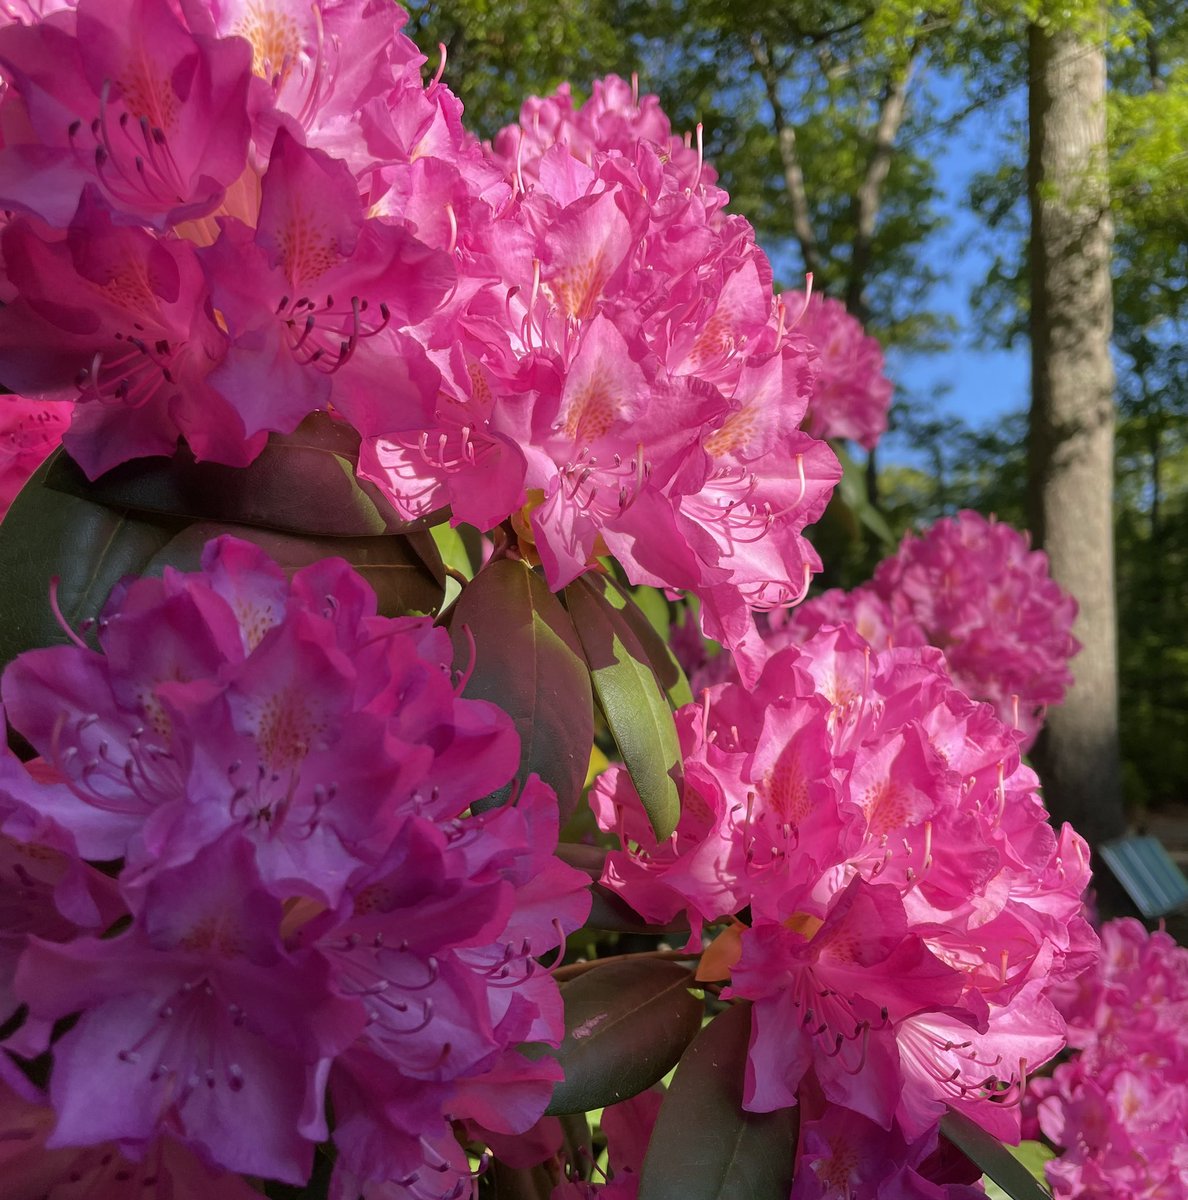 rhododendron 
blooms
exploding smiles

redolent ecstasy 
of bumblebees
off to work

#vss365 #redolent